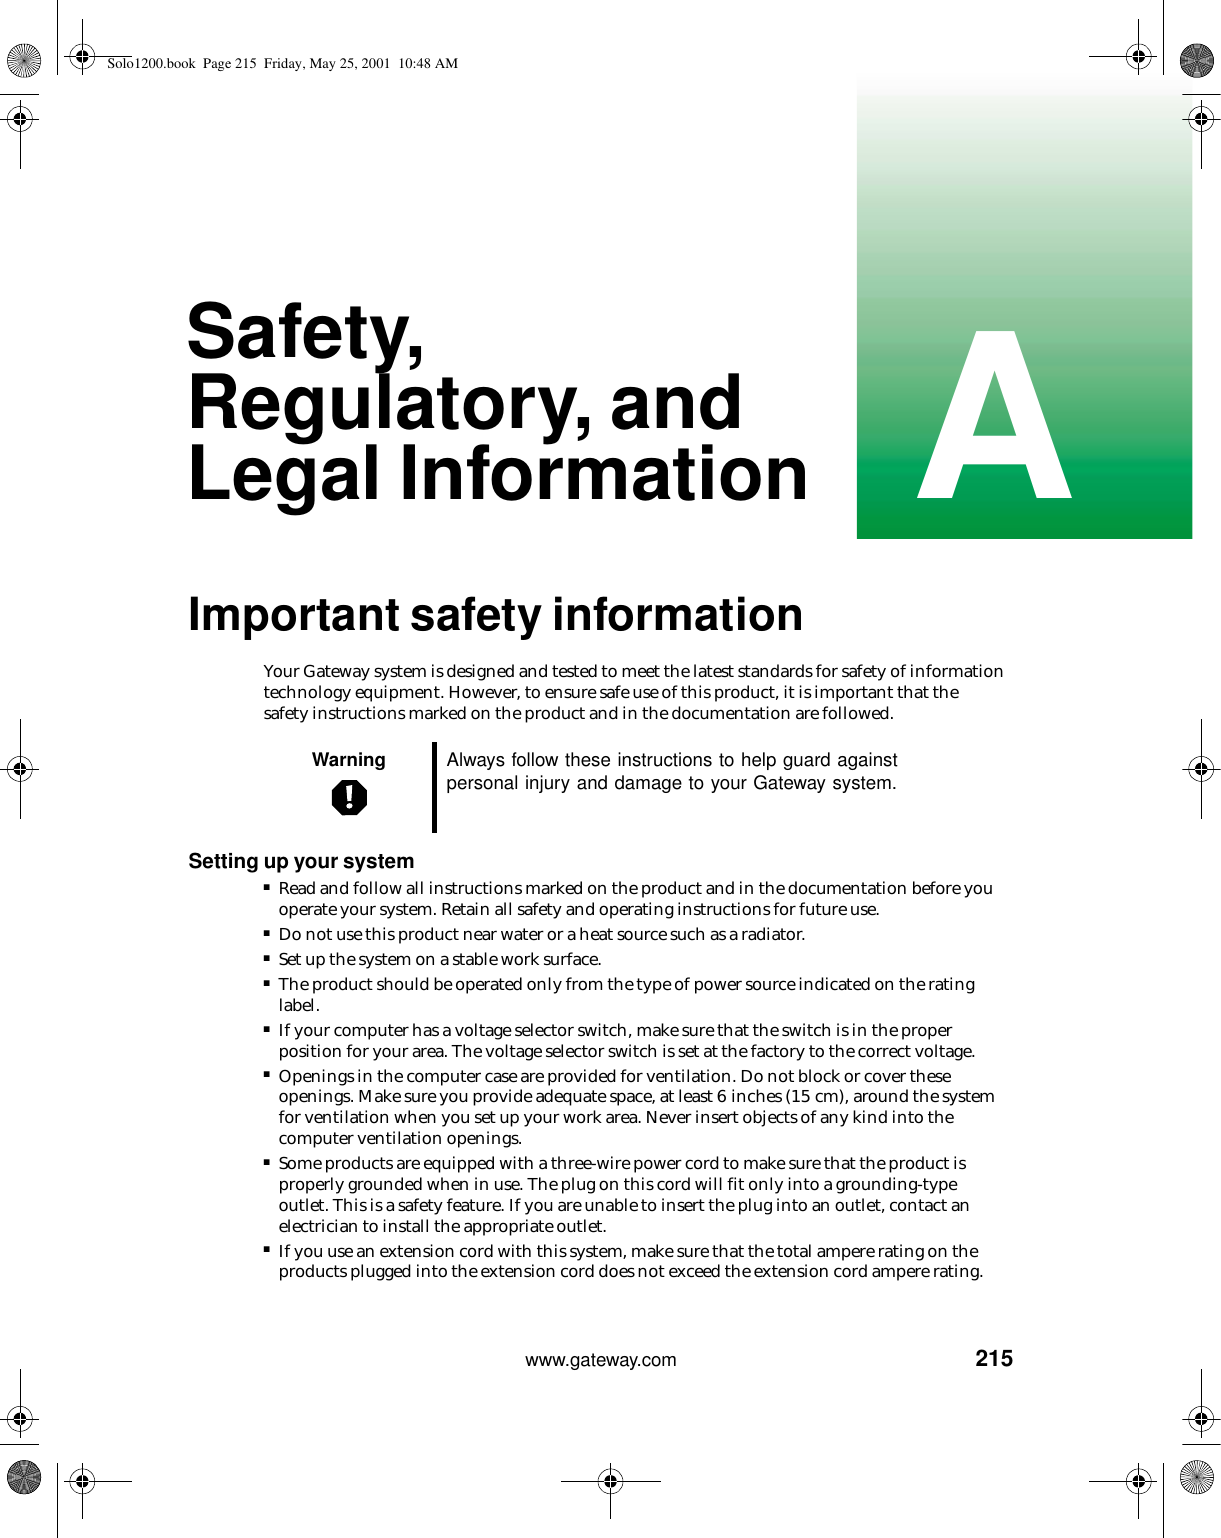 215Awww.gateway.comSafety, Regulatory, and Legal InformationImportant safety informationYour Gateway system is designed and tested to meet the latest standards for safety of information technology equipment. However, to ensure safe use of this product, it is important that the safety instructions marked on the product and in the documentation are followed.Setting up your system■Read and follow all instructions marked on the product and in the documentation before you operate your system. Retain all safety and operating instructions for future use.■Do not use this product near water or a heat source such as a radiator.■Set up the system on a stable work surface.■The product should be operated only from the type of power source indicated on the rating label.■If your computer has a voltage selector switch, make sure that the switch is in the proper position for your area. The voltage selector switch is set at the factory to the correct voltage.■Openings in the computer case are provided for ventilation. Do not block or cover these openings. Make sure you provide adequate space, at least 6 inches (15 cm), around the system for ventilation when you set up your work area. Never insert objects of any kind into the computer ventilation openings.■Some products are equipped with a three-wire power cord to make sure that the product is properly grounded when in use. The plug on this cord will fit only into a grounding-type outlet. This is a safety feature. If you are unable to insert the plug into an outlet, contact an electrician to install the appropriate outlet.■If you use an extension cord with this system, make sure that the total ampere rating on the products plugged into the extension cord does not exceed the extension cord ampere rating.Warning Always follow these instructions to help guard against personal injury and damage to your Gateway system.Solo1200.book Page 215 Friday, May 25, 2001 10:48 AM